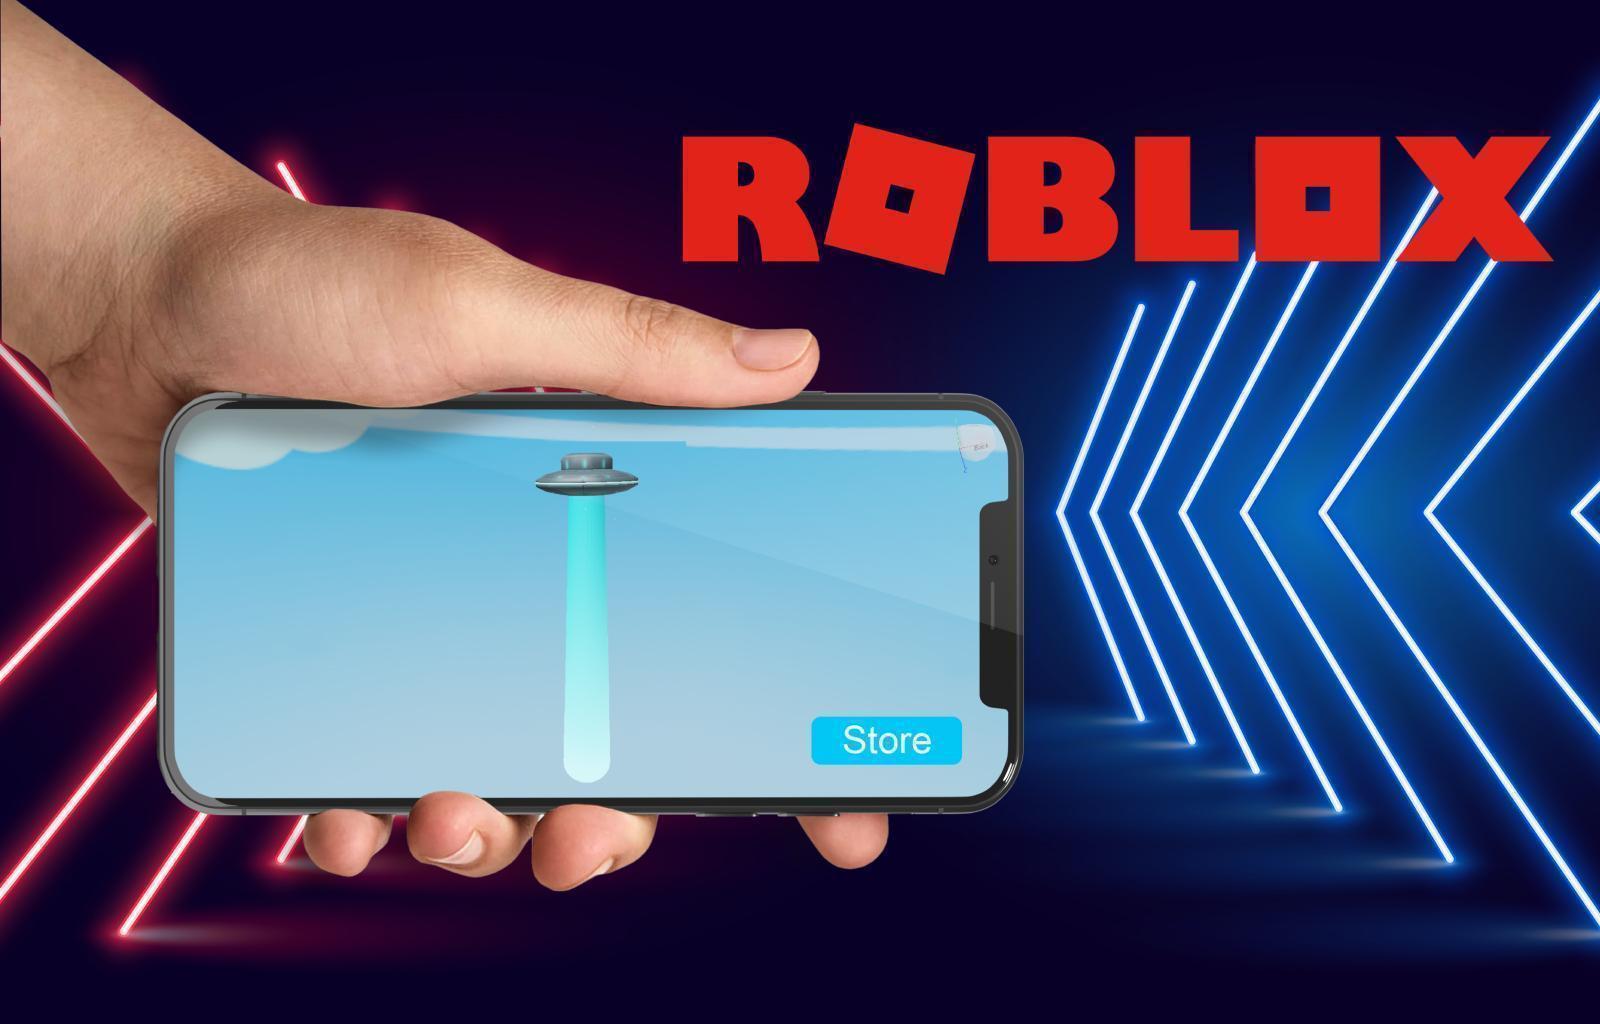 How To Download Roblox Studio On Mobile 